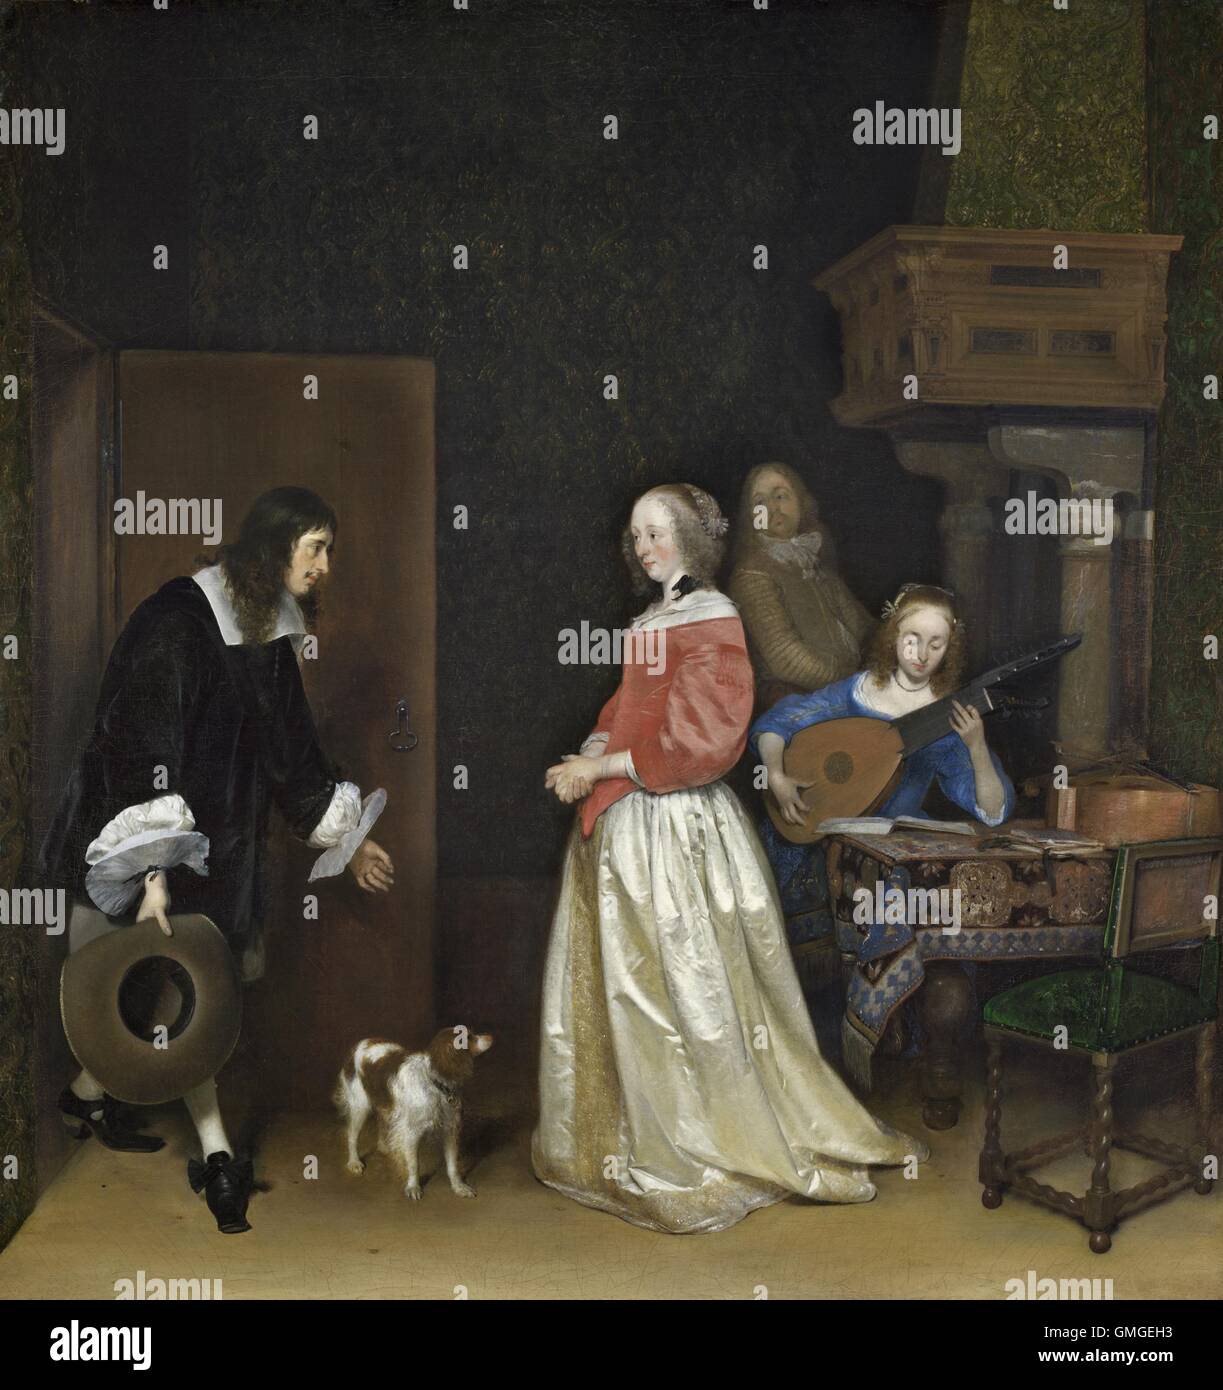 The Suitor's Visit, by Gerard ter Borch, the Younger, 1658, Dutch painting, oil on canvas. A man bows gracefully as he is greeted by a young woman wearing a white satin dress with a corset jacket. Another woman plays a lute and a man warms his hands at th (BSLOC 2016 6 162) Stock Photo